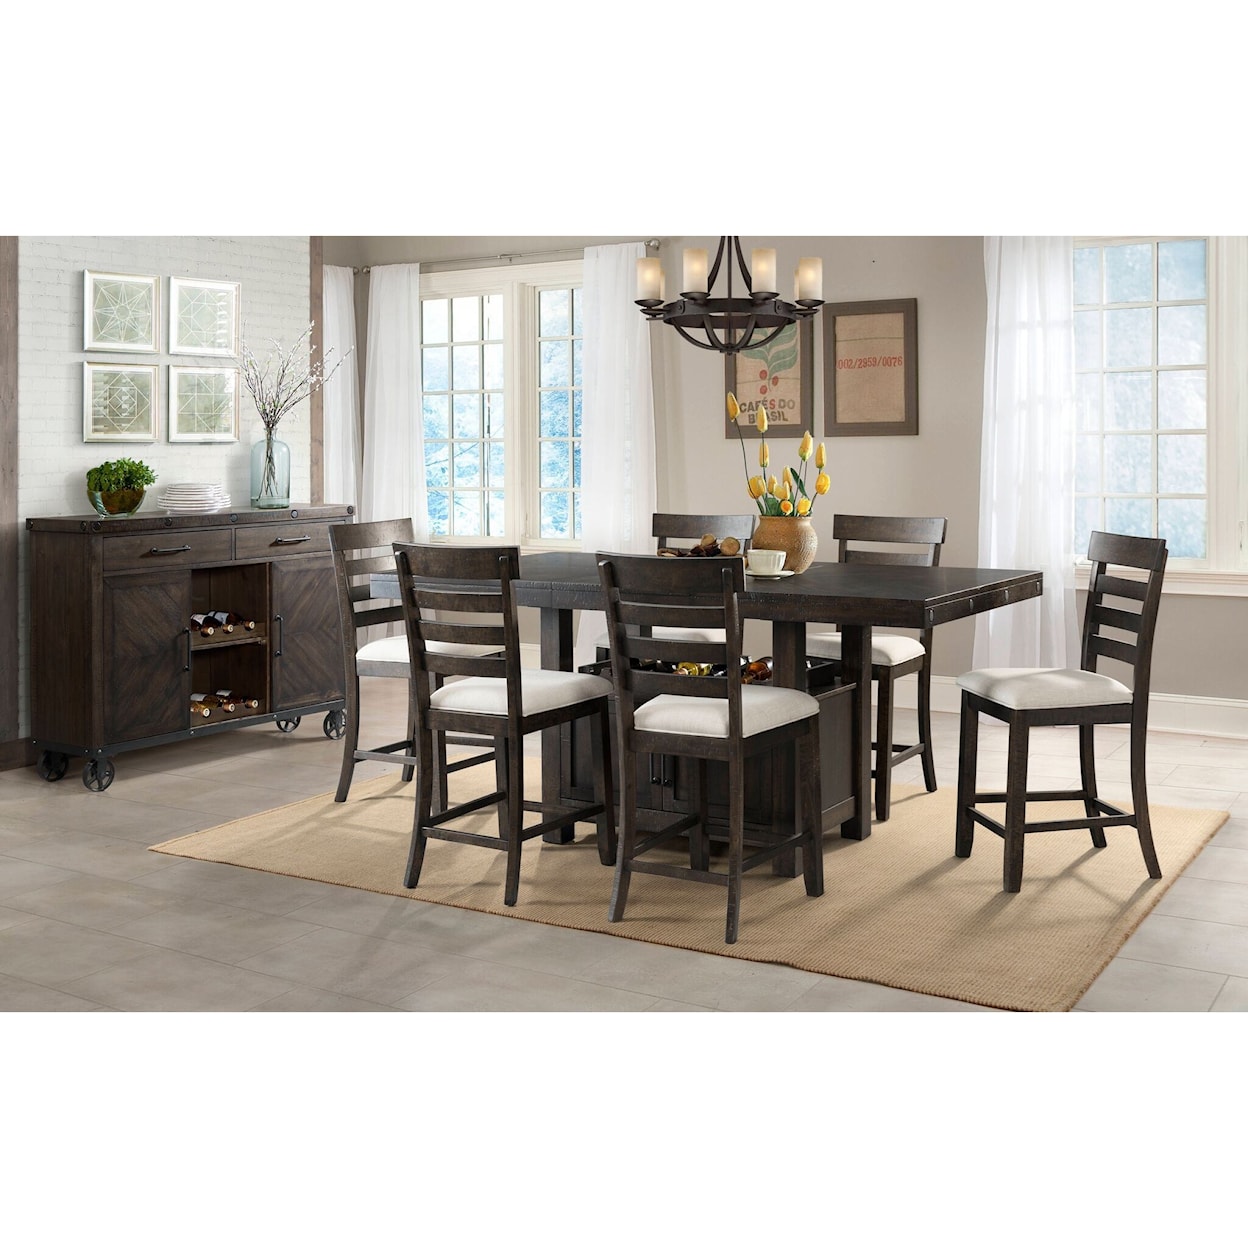 Elements International Colorado Counter Height Dining Set